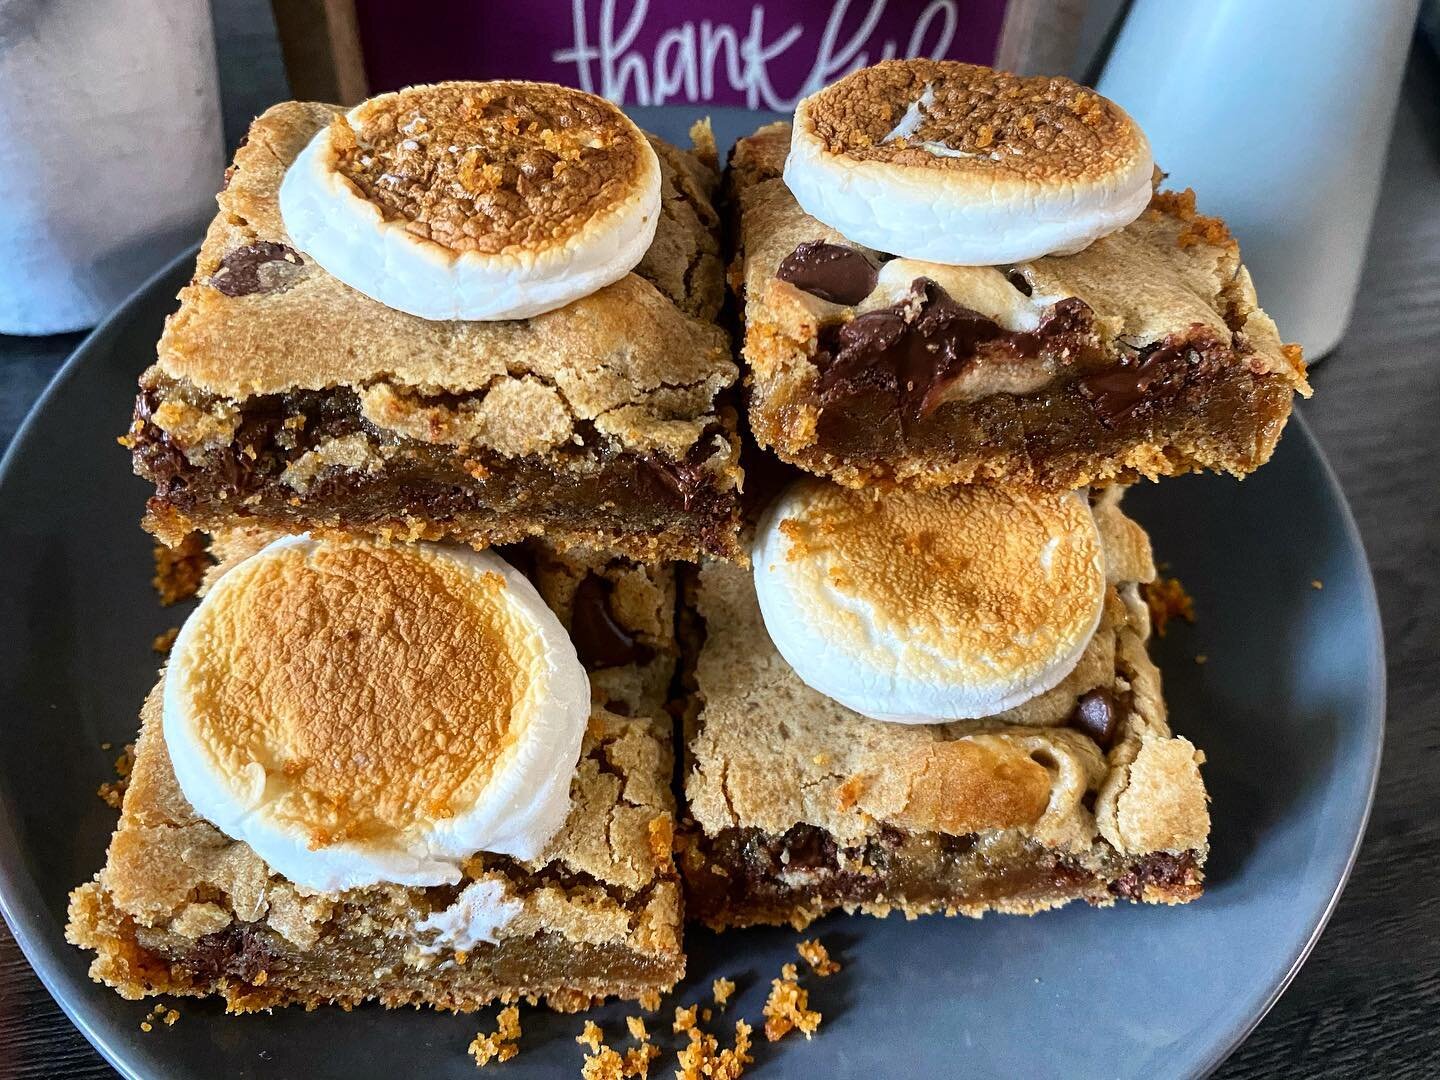 Next week we will be offering our S&rsquo;mores Bars in our takeout window. These delicious cookie bars have a buttery graham cracker crust, a gooey cookie center with chocolate chips and a perfectly roasted marshmallow on top. The perfect fall &ldqu